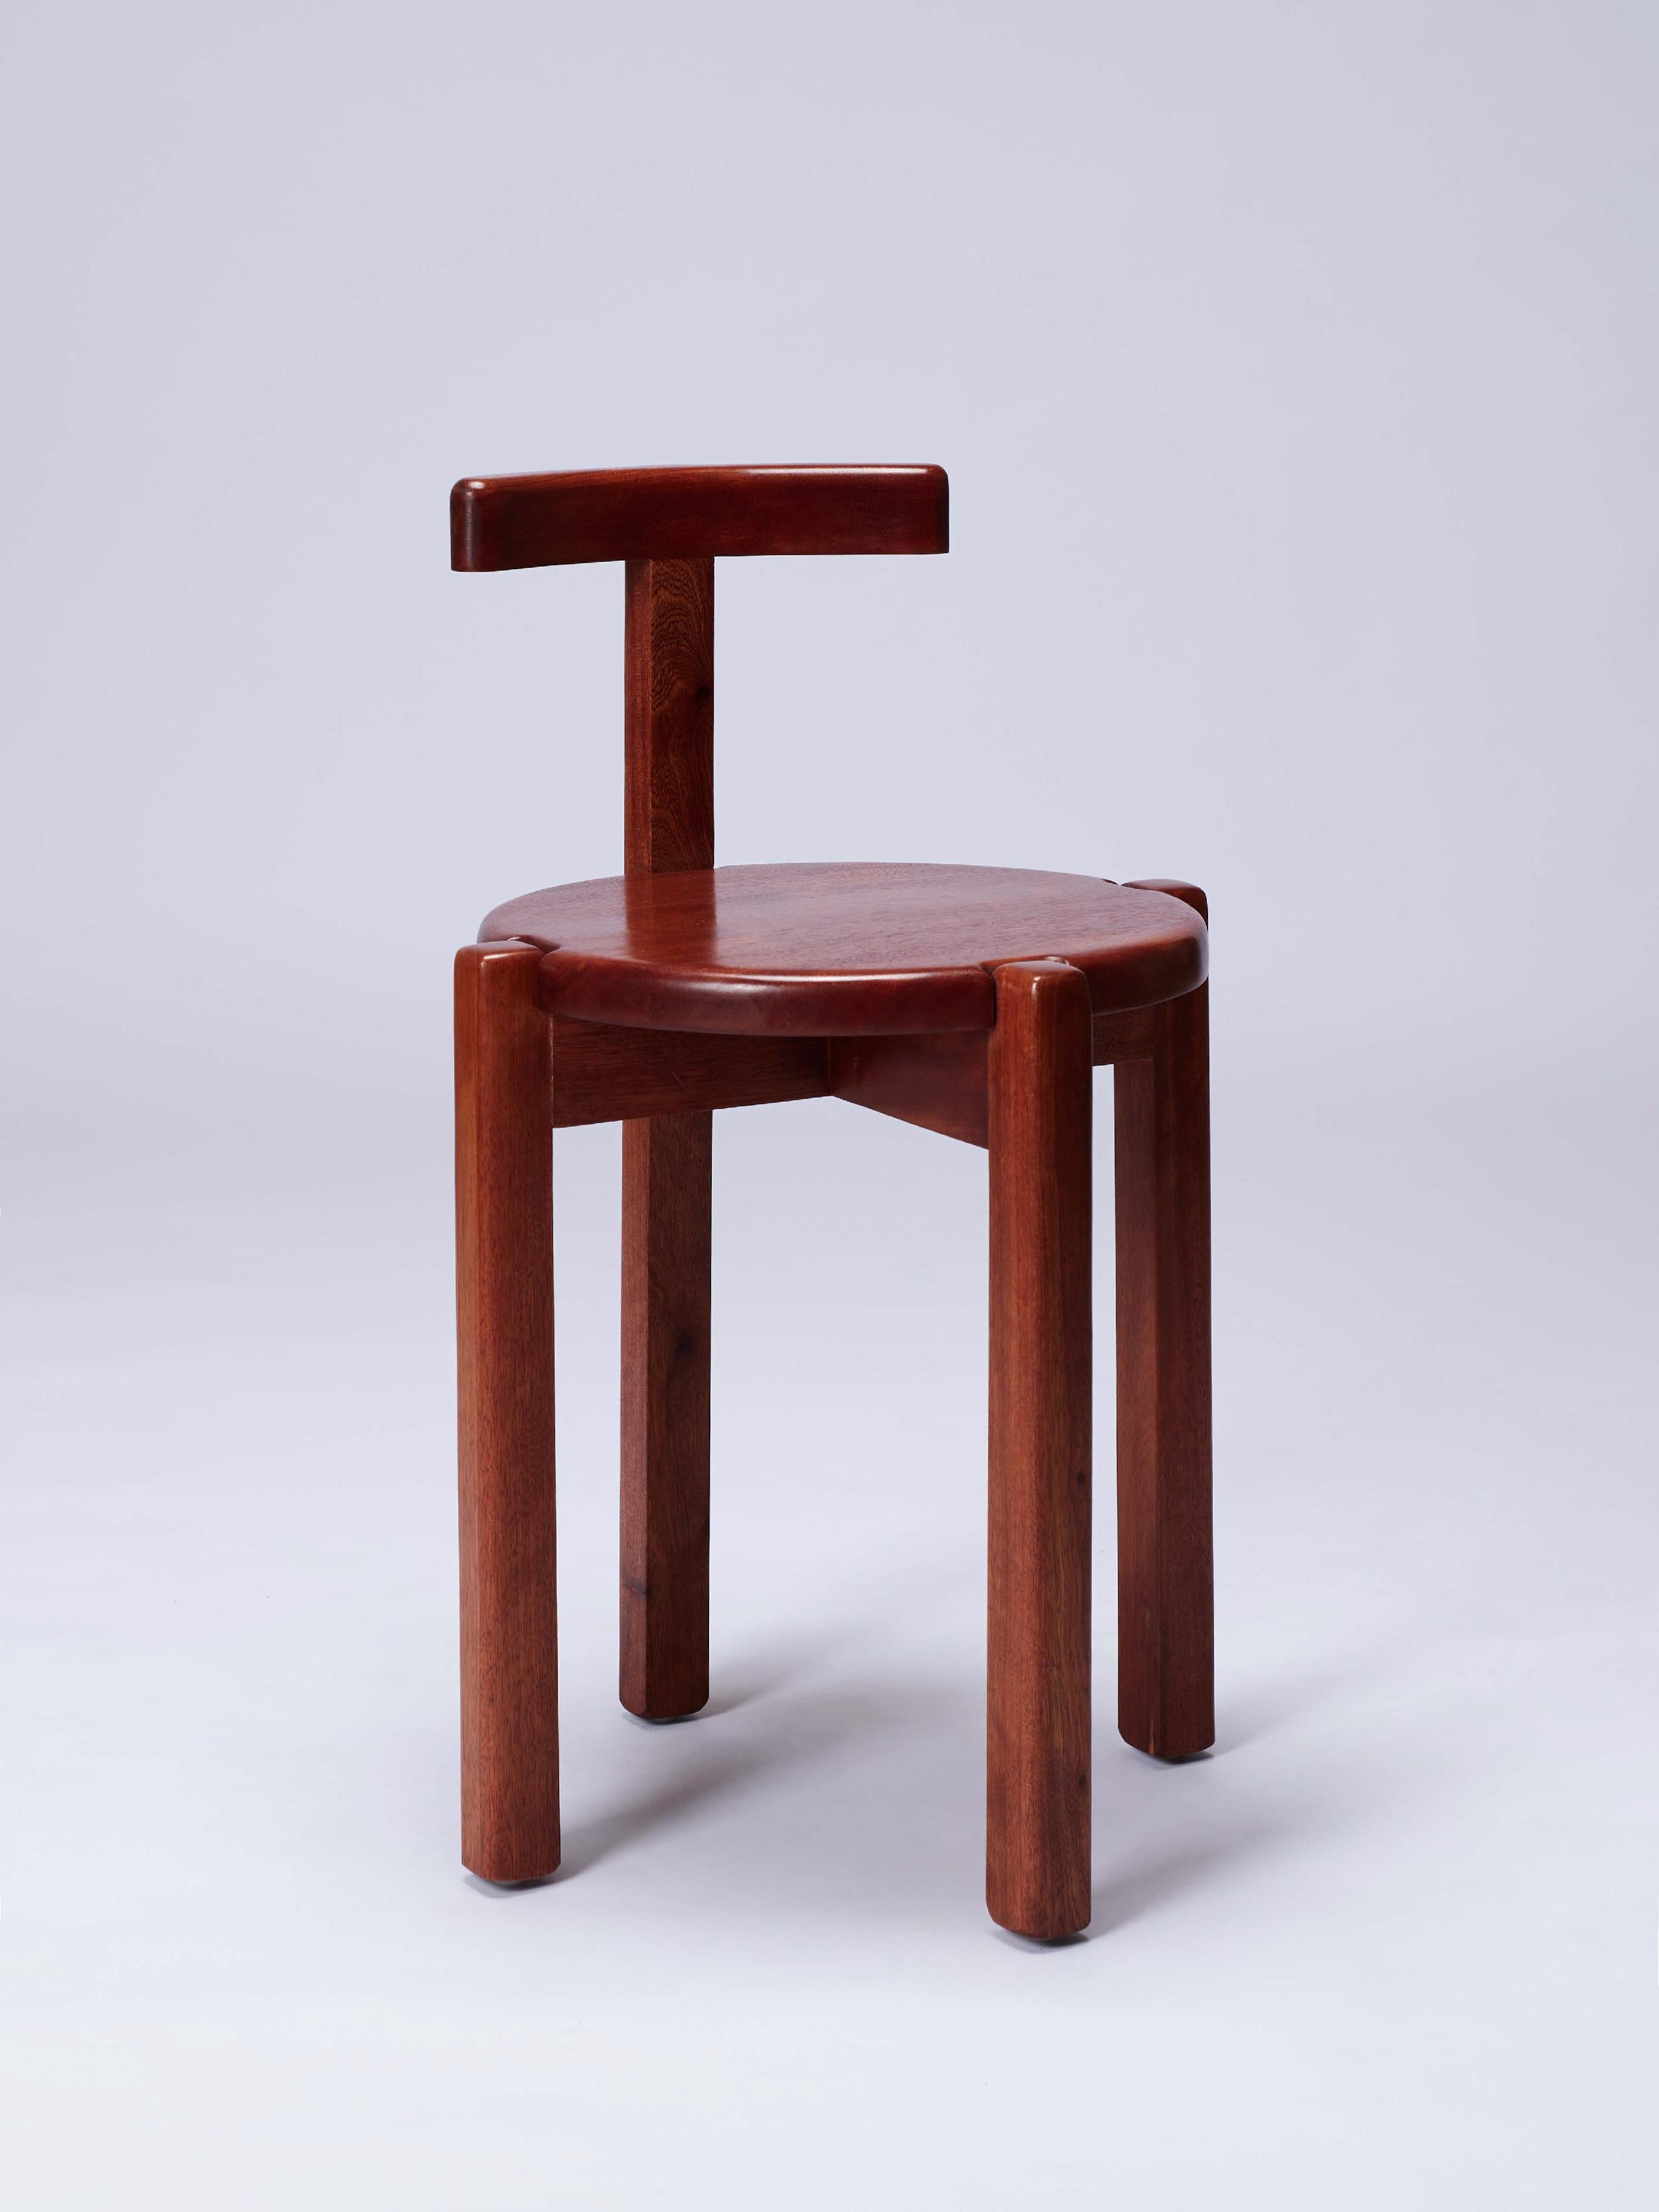 Argentine ORNO Contemporary Chair in Solid Hardwood by Ries For Sale